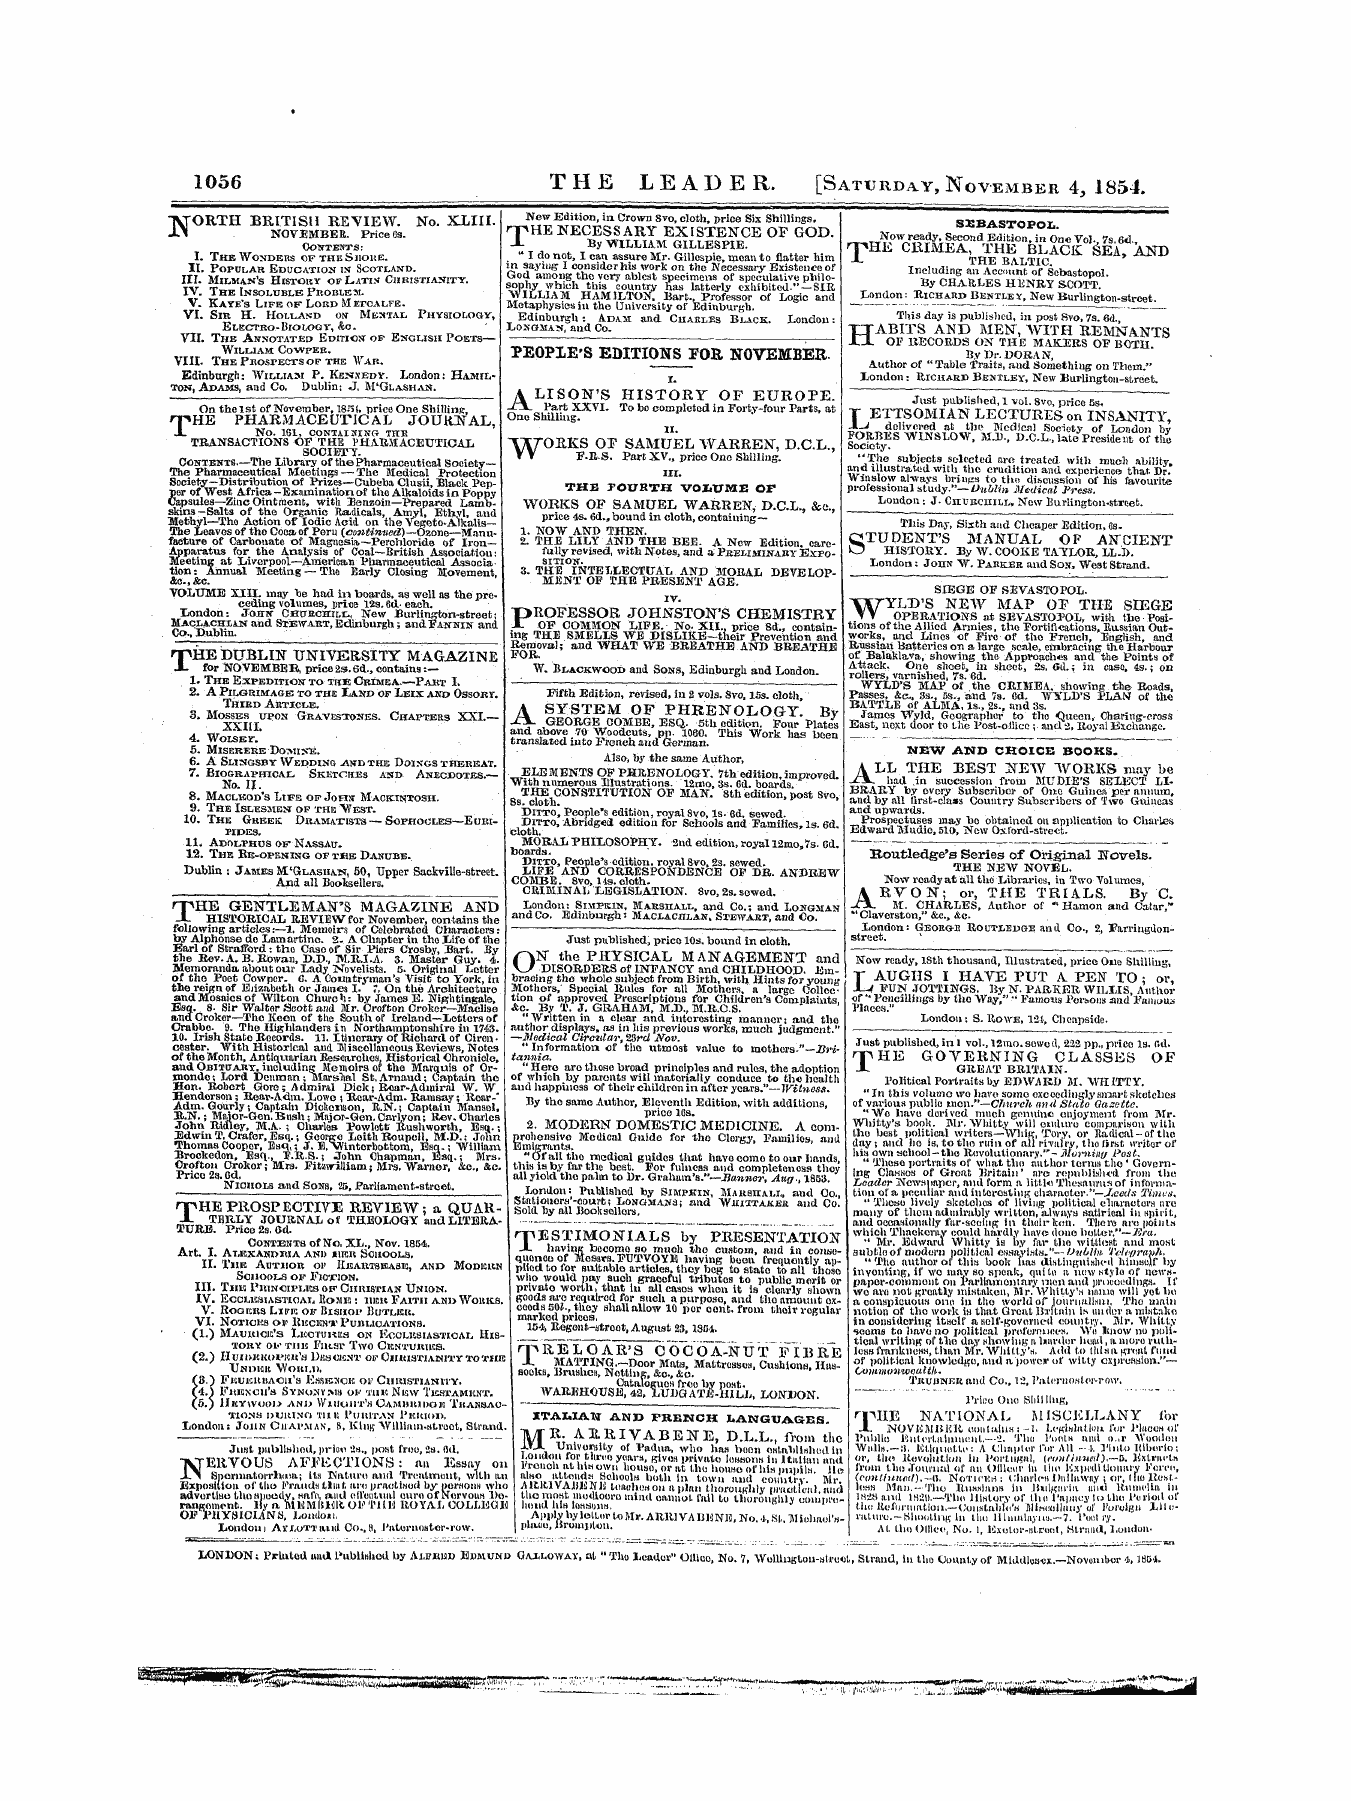 Leader (1850-1860): jS F Y, Town edition - Untitled Ad